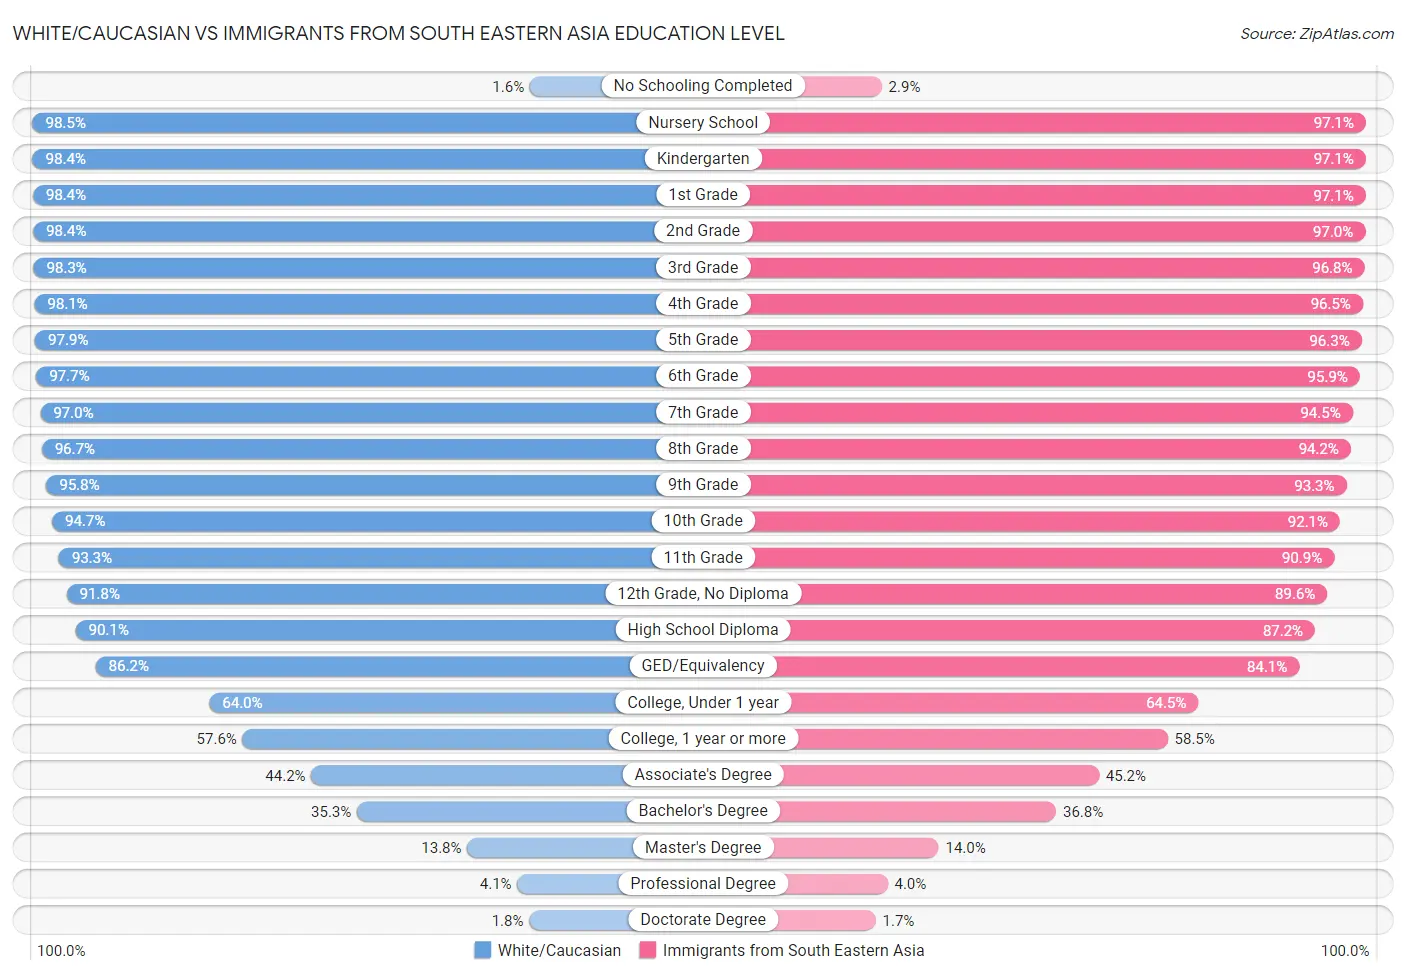 White/Caucasian vs Immigrants from South Eastern Asia Education Level